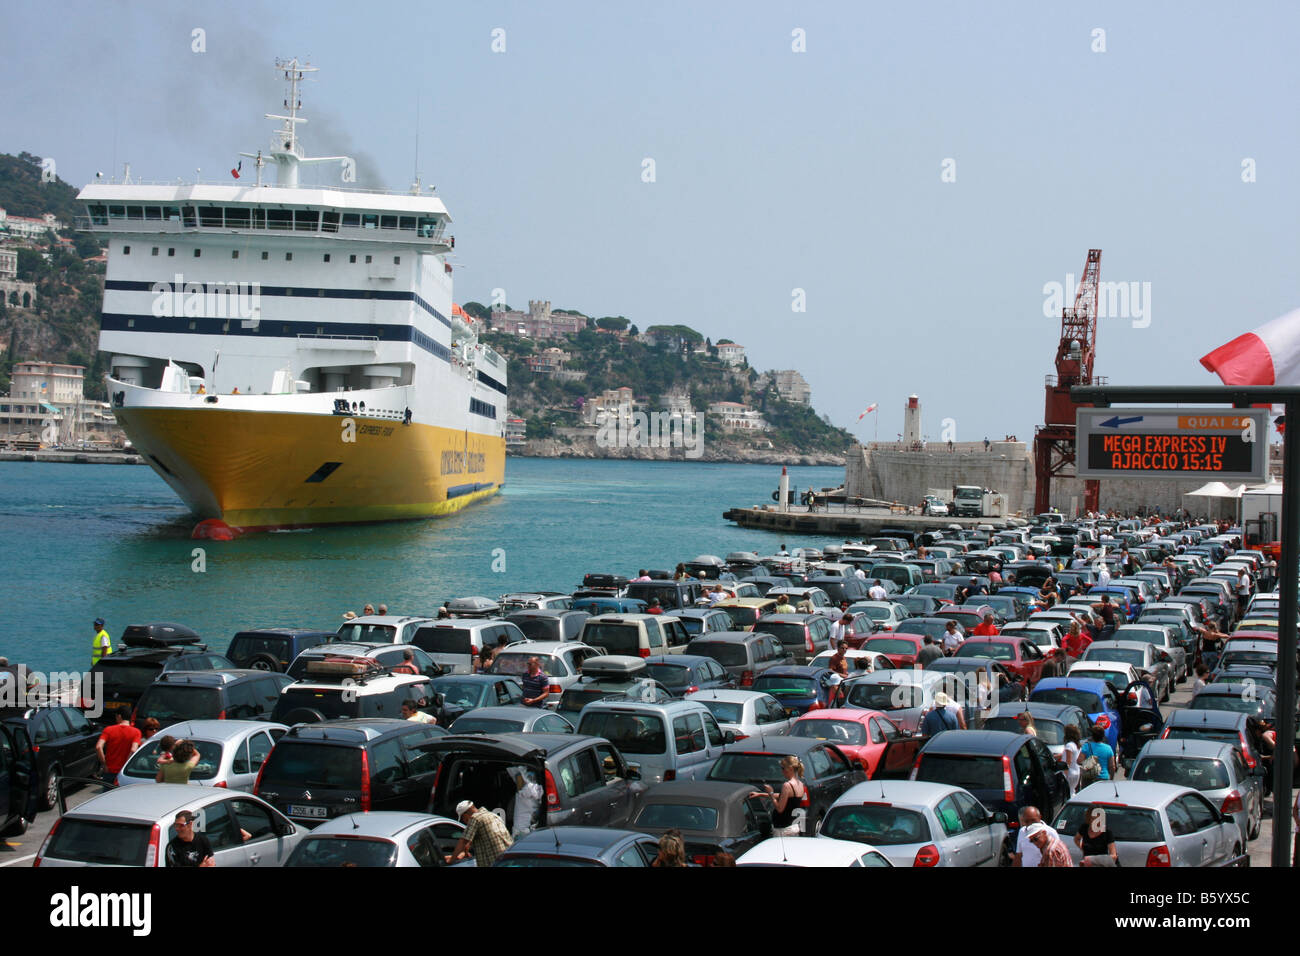 passengers on the dockside watch as Mega Express Four, the ferry from Corsica docks at the port of Nice, Côte d'Azur, France Stock Photo